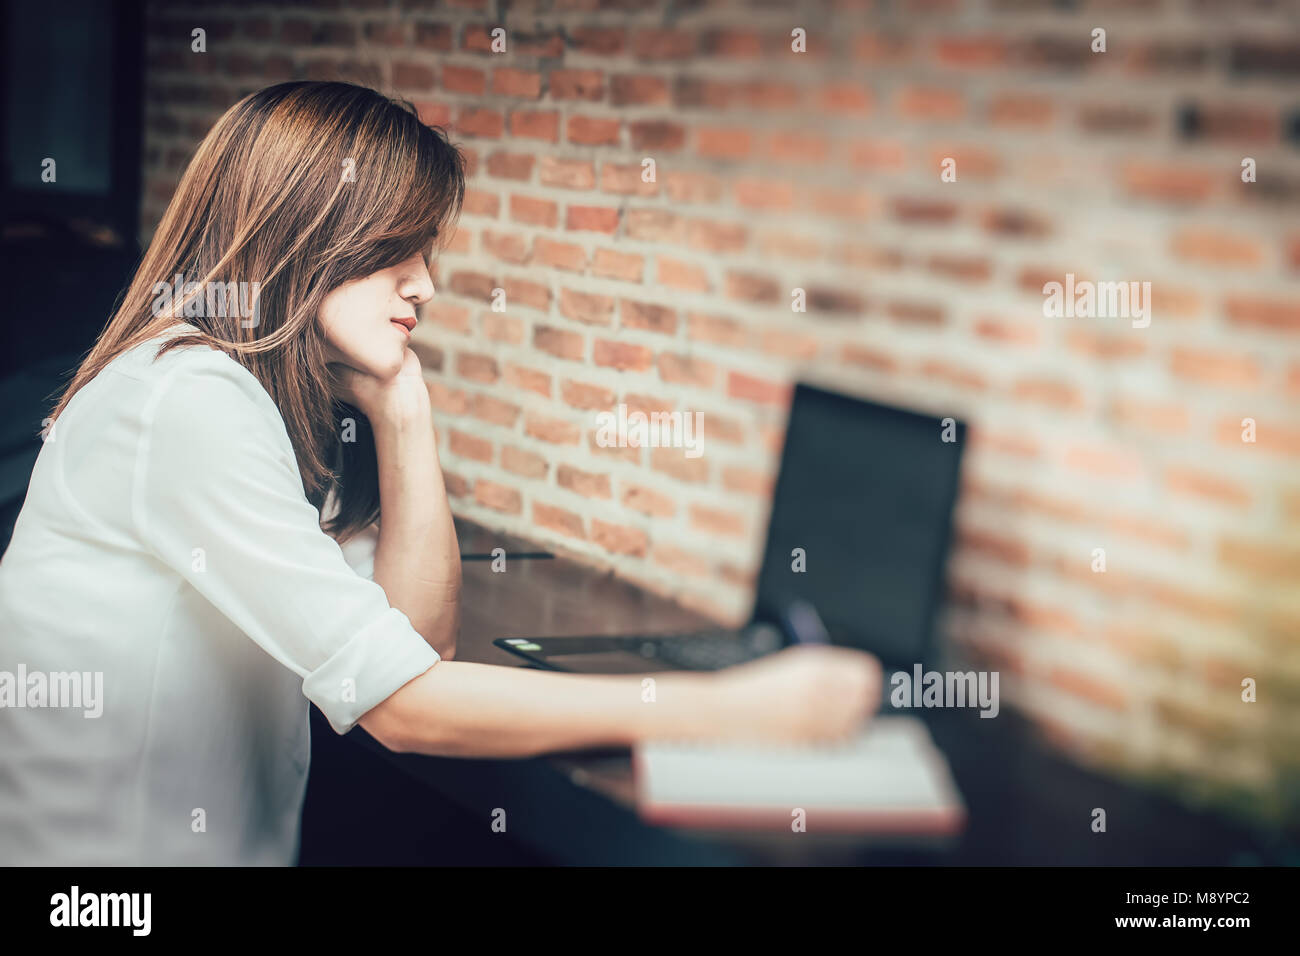 Fatigue Women Thinking alone while working and take a note Stock Photo